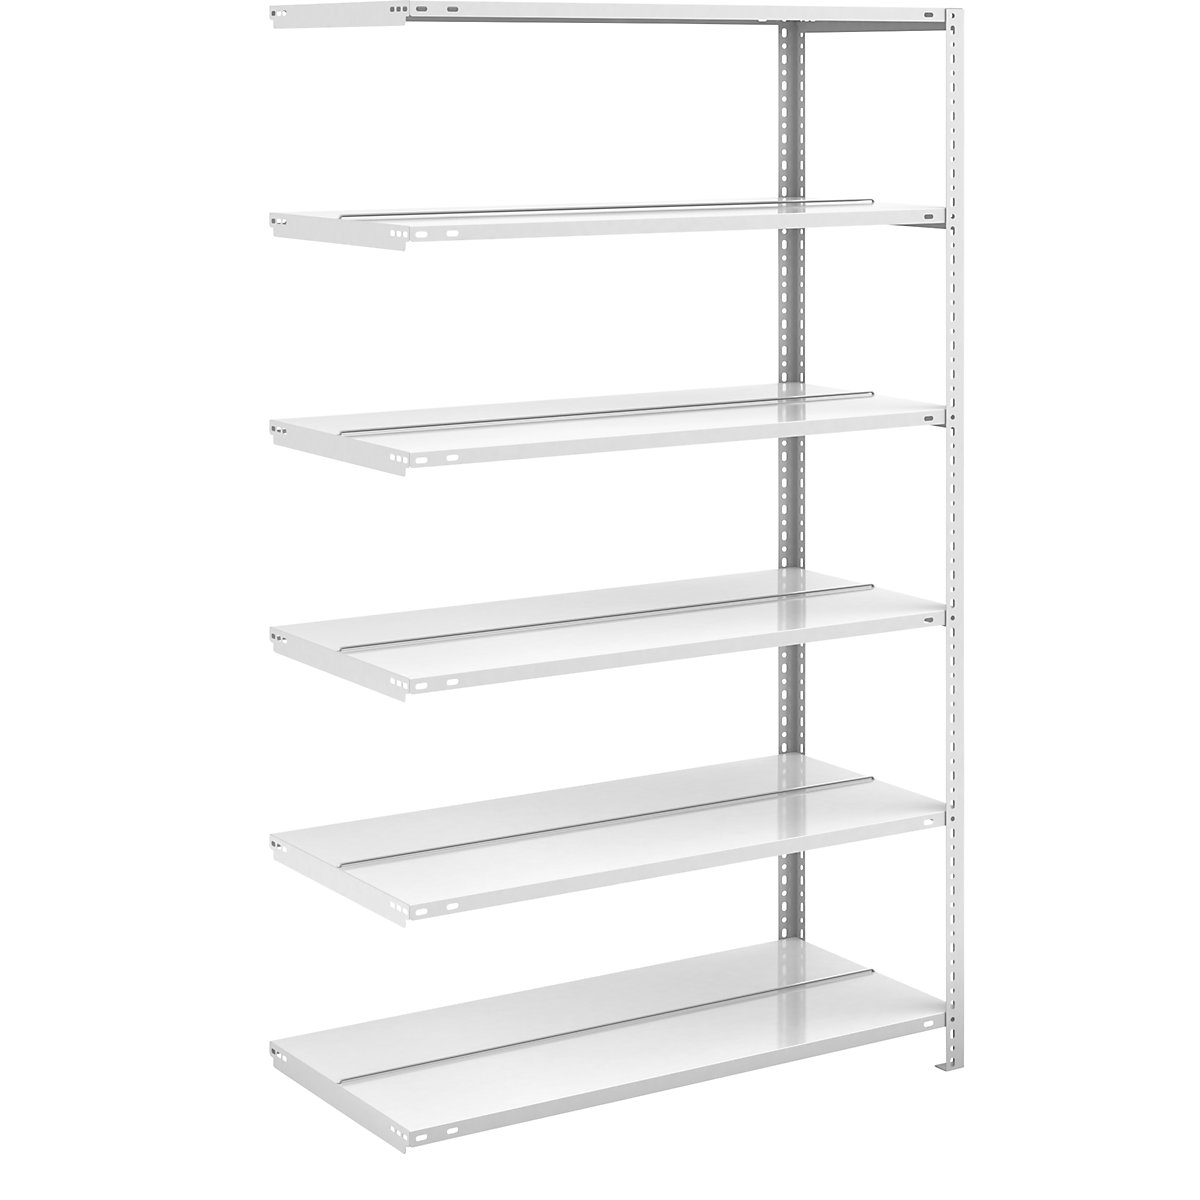 Bolt-together archive shelving, light grey RAL 7035 – hofe, shelf height 1850 mm, double sided, extension shelf, width x depth 1000 x 600 mm-4